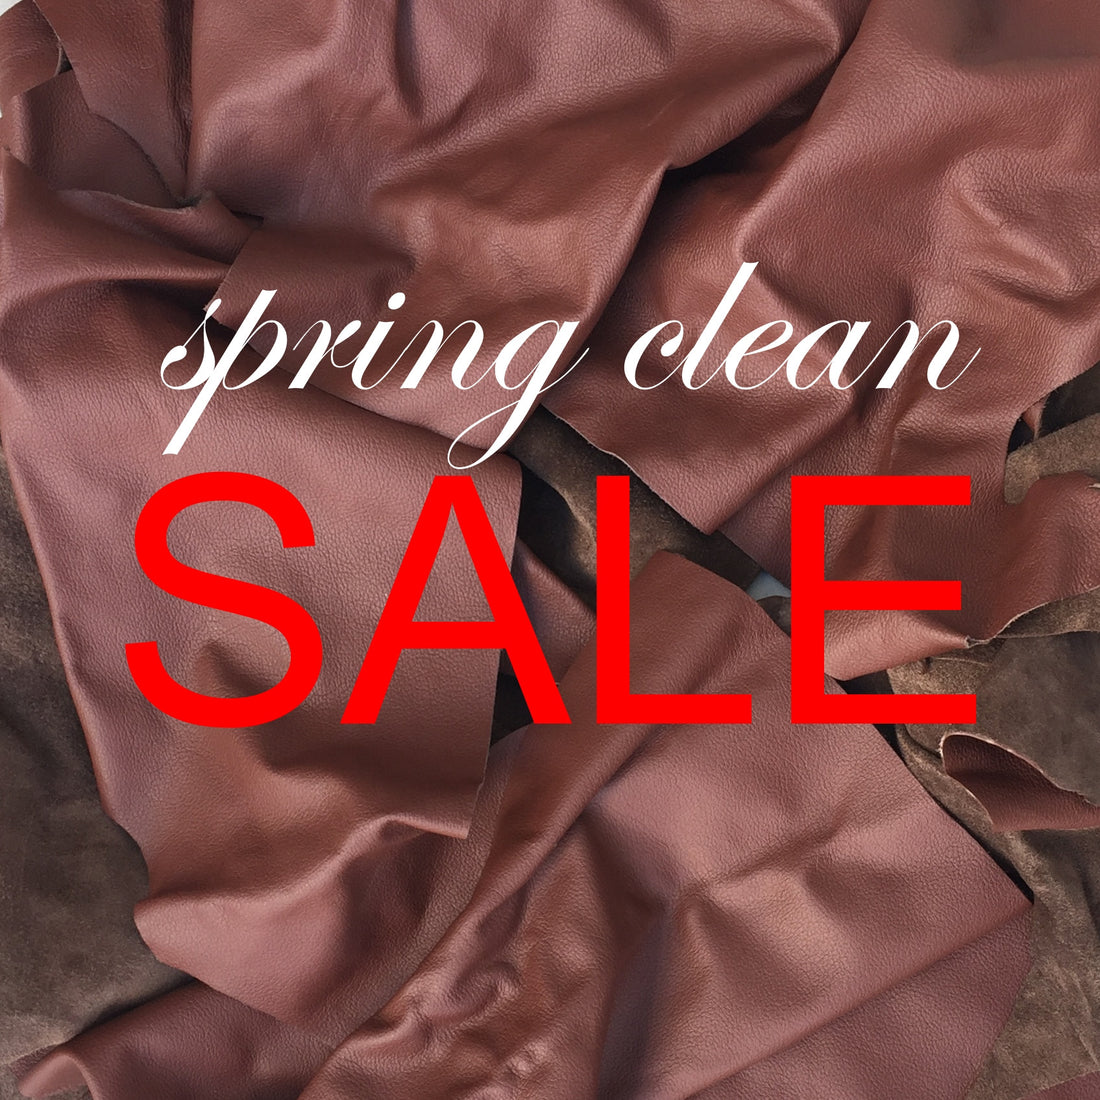 Spring clean - remnants and floor stock for sale